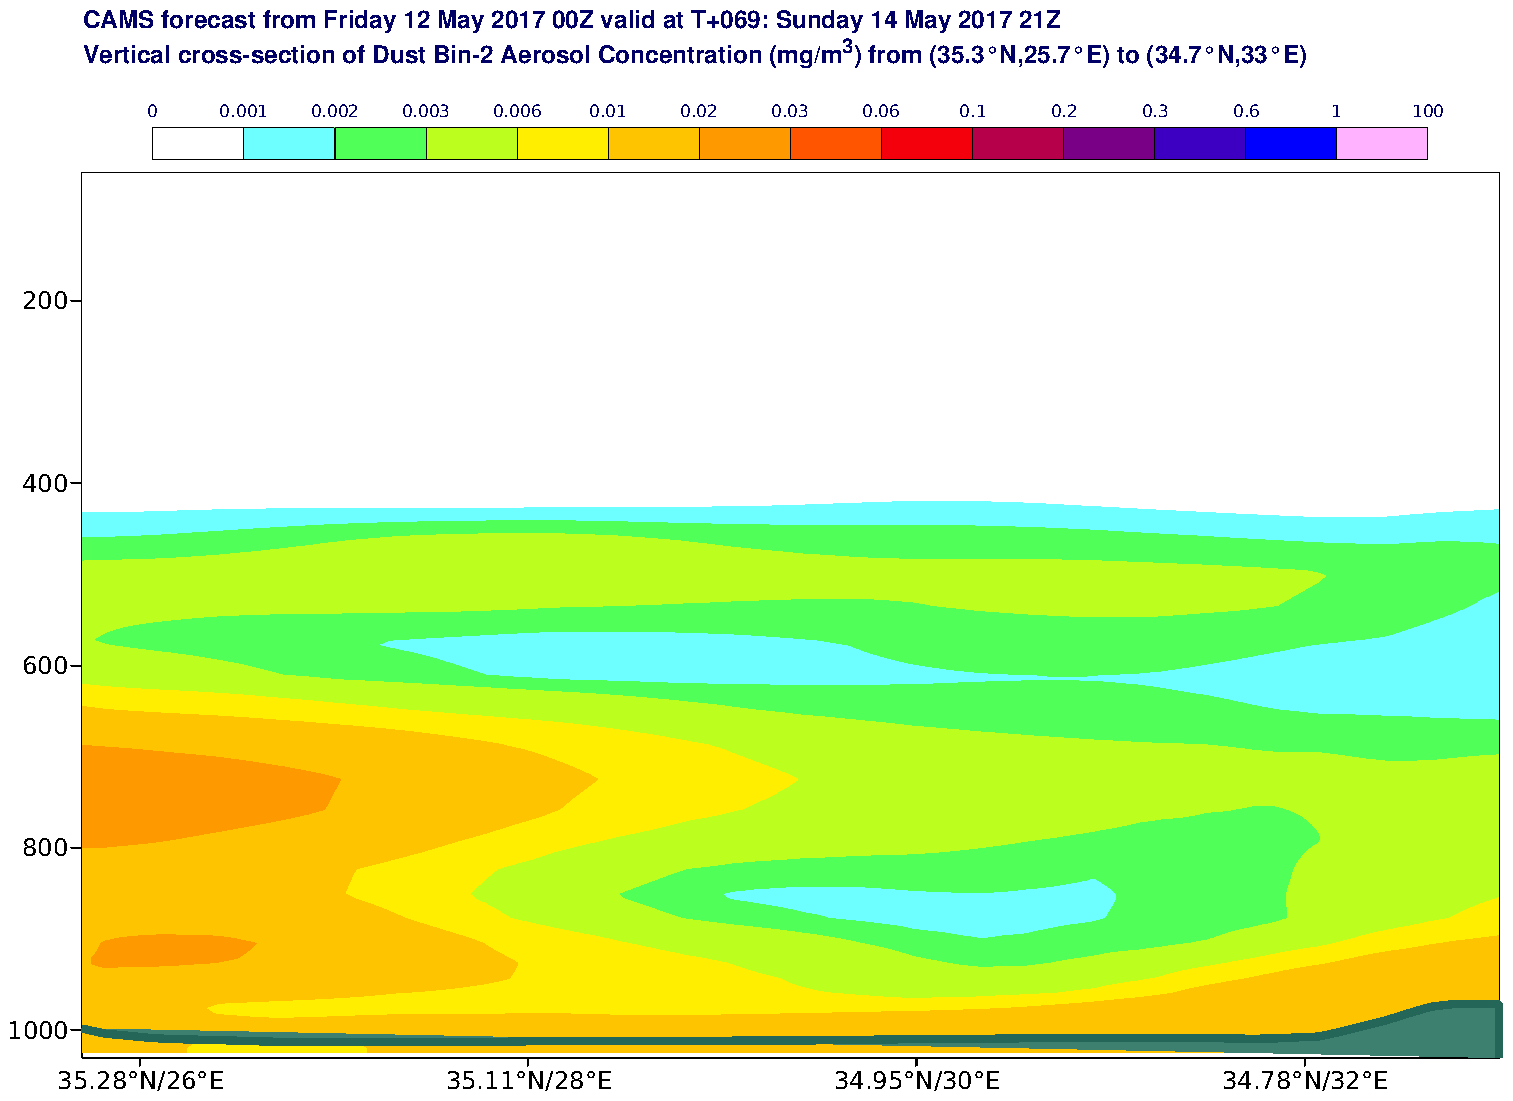 Vertical cross-section of Dust Bin-2 Aerosol Concentration (mg/m3) valid at T69 - 2017-05-14 21:00